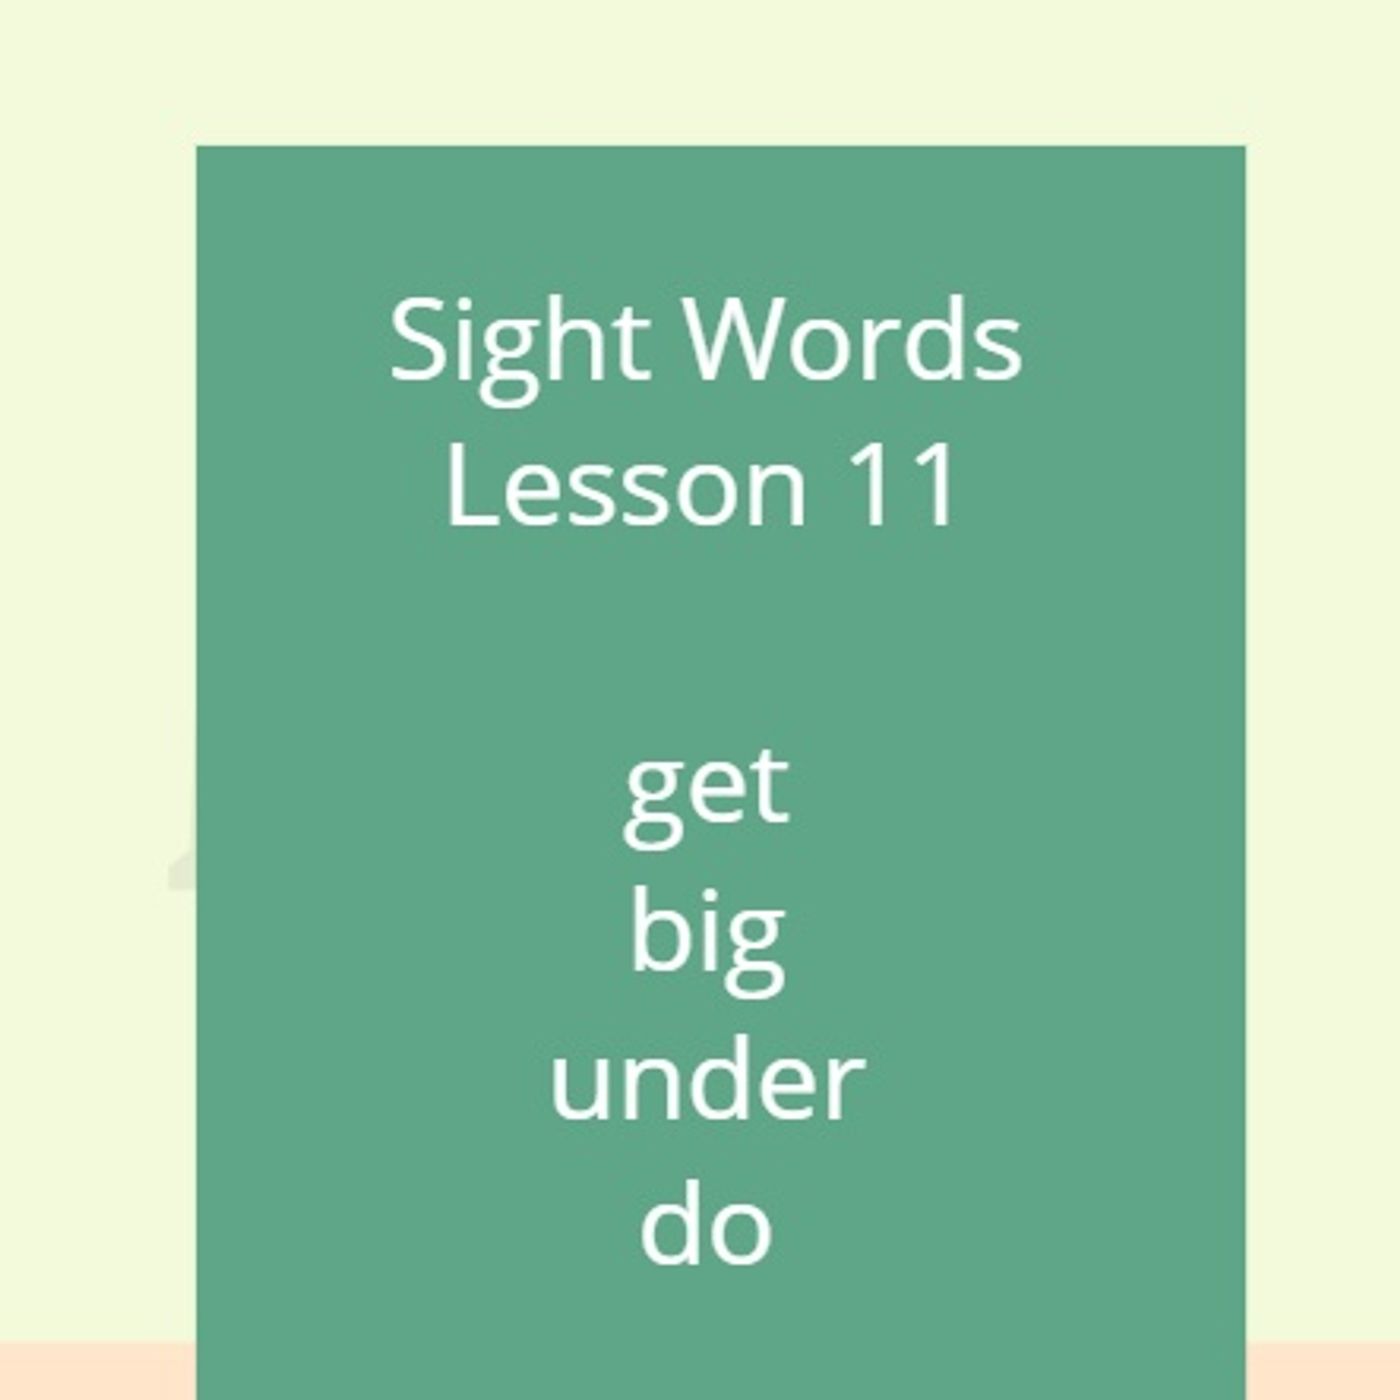 Sight Words Lesson 11